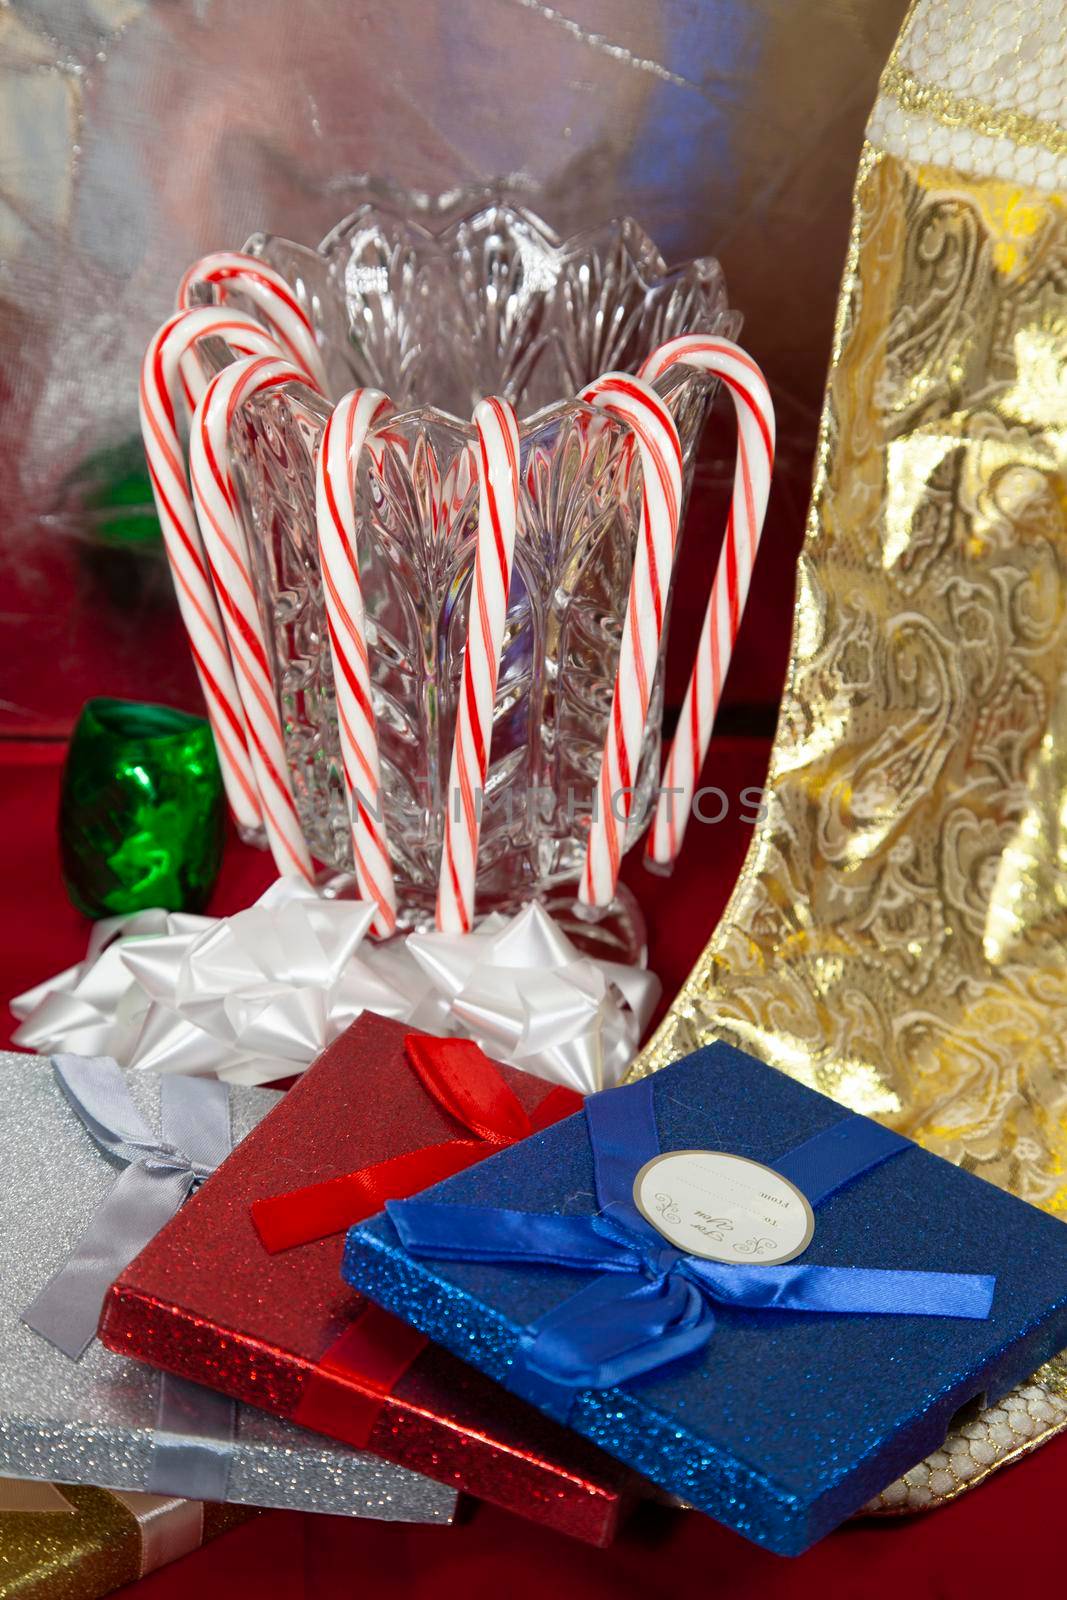 Red striped candy canes hanging on a crystal vase next to a golden stocking and silver, red, and blue presents, on a red tabletop